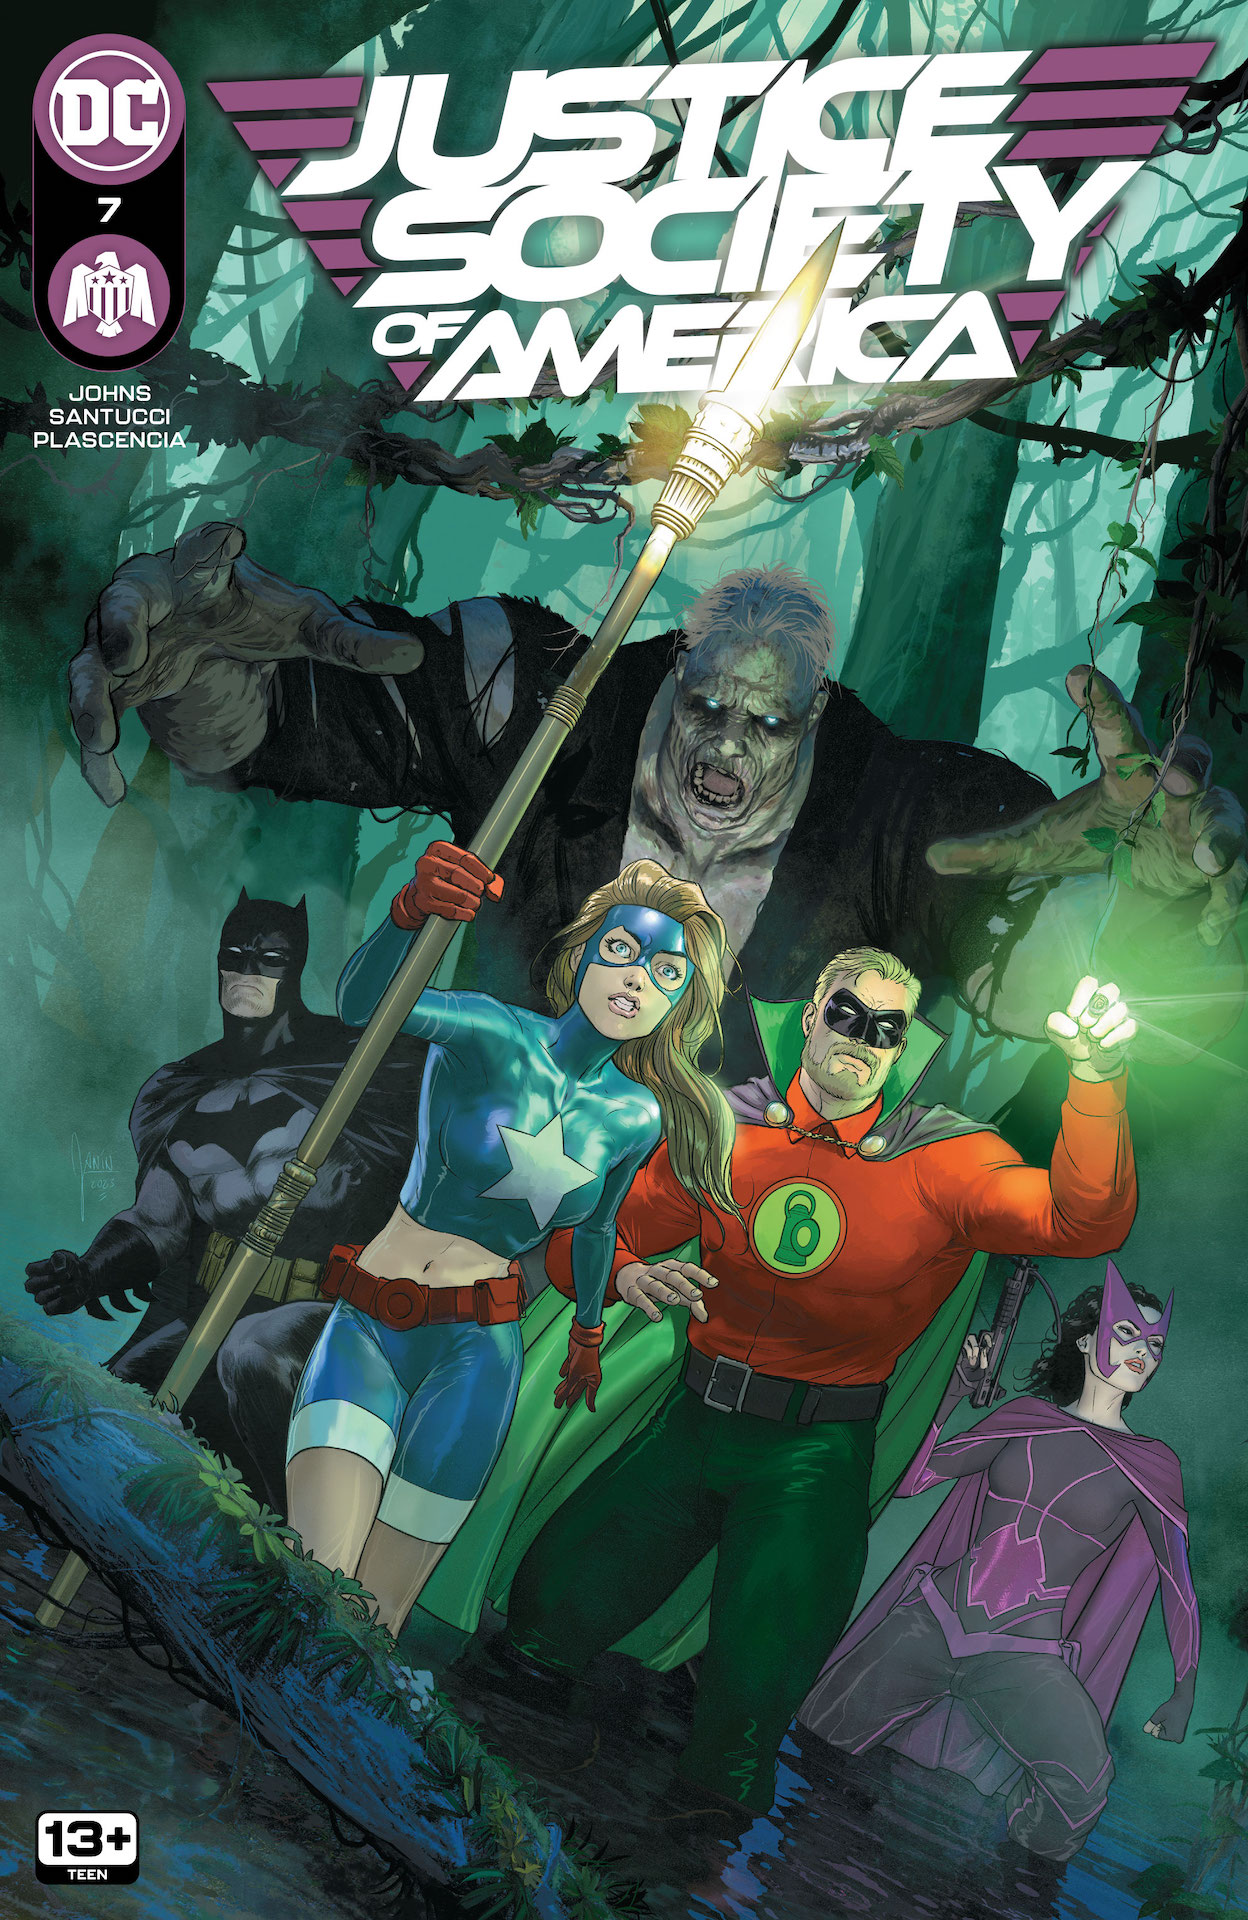 DC Preview: Justice Society of America #7